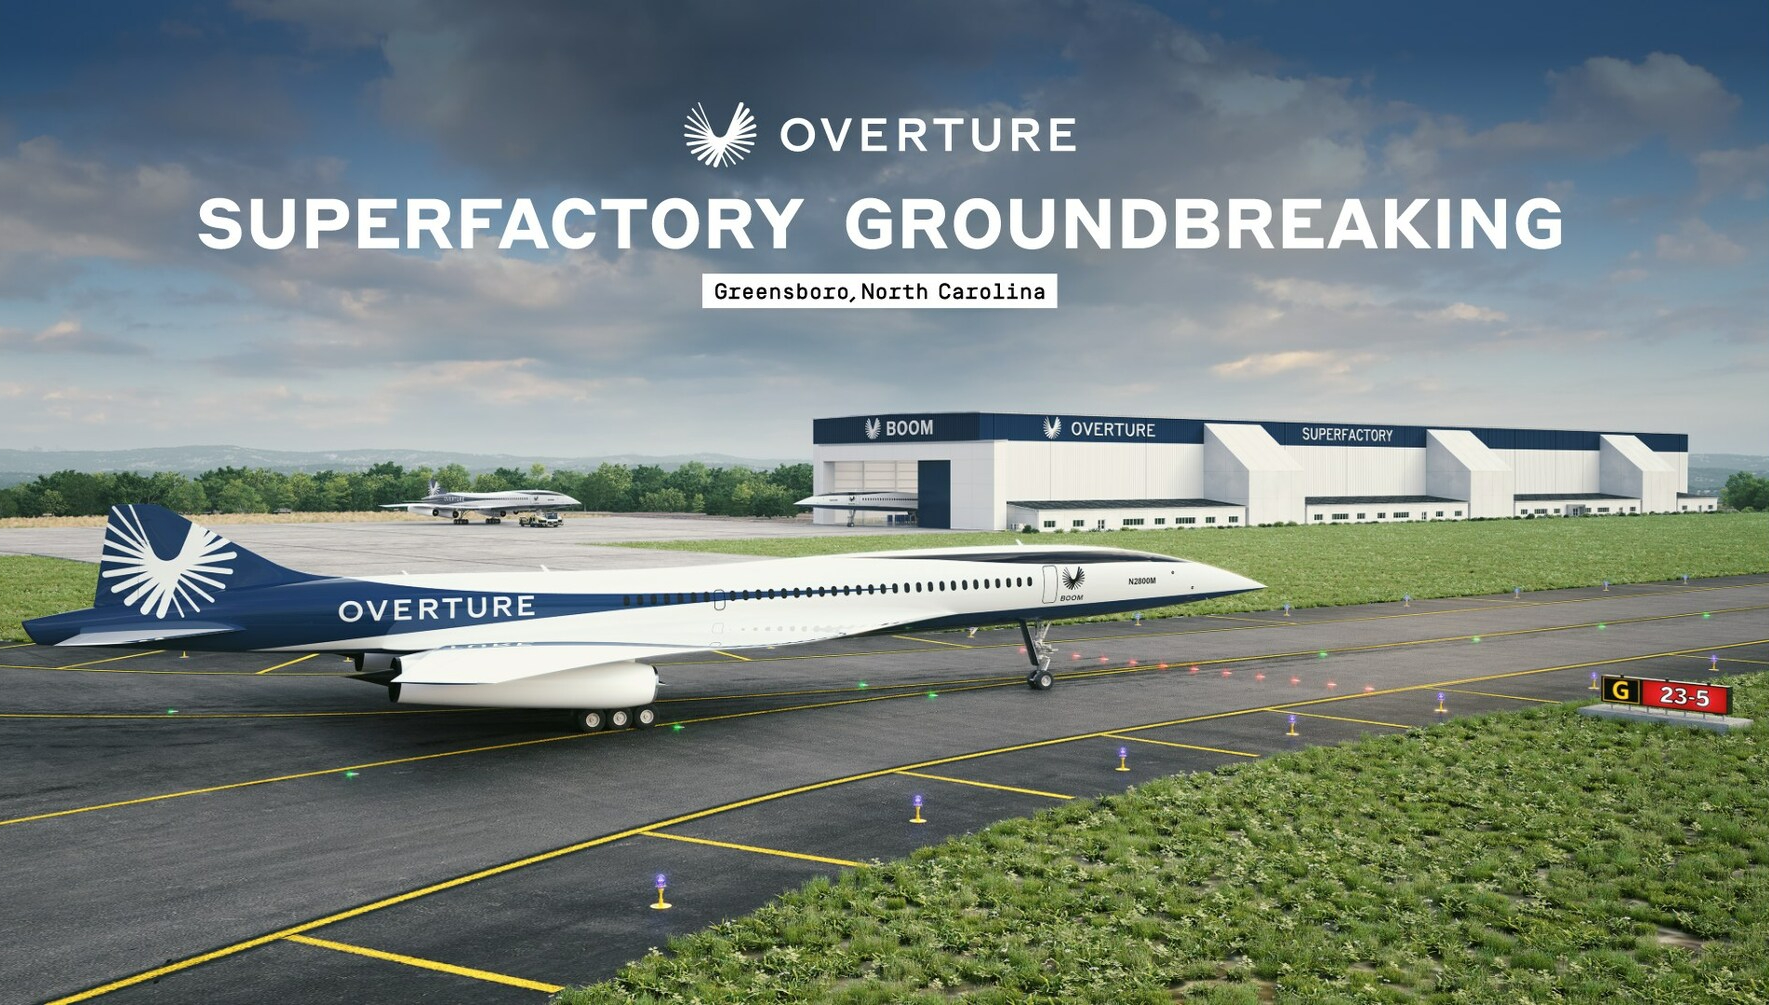 Boom Supersonic begins construction of Overture Superfactory